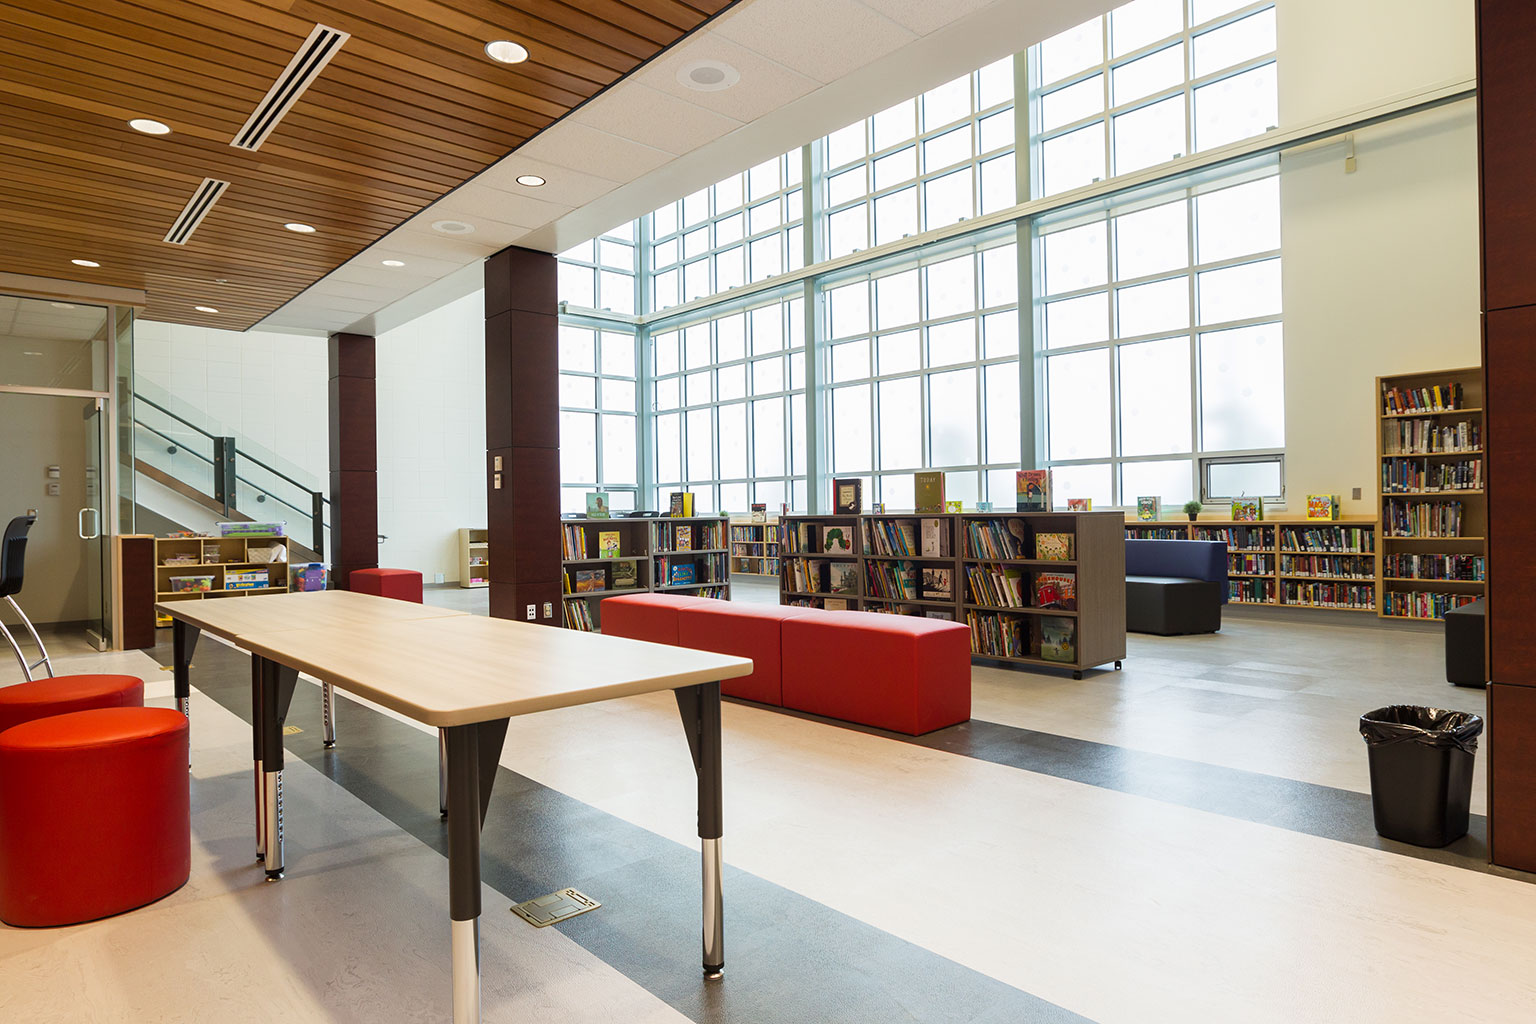 Top Educational Classroom Design & Furniture Trends For 2019